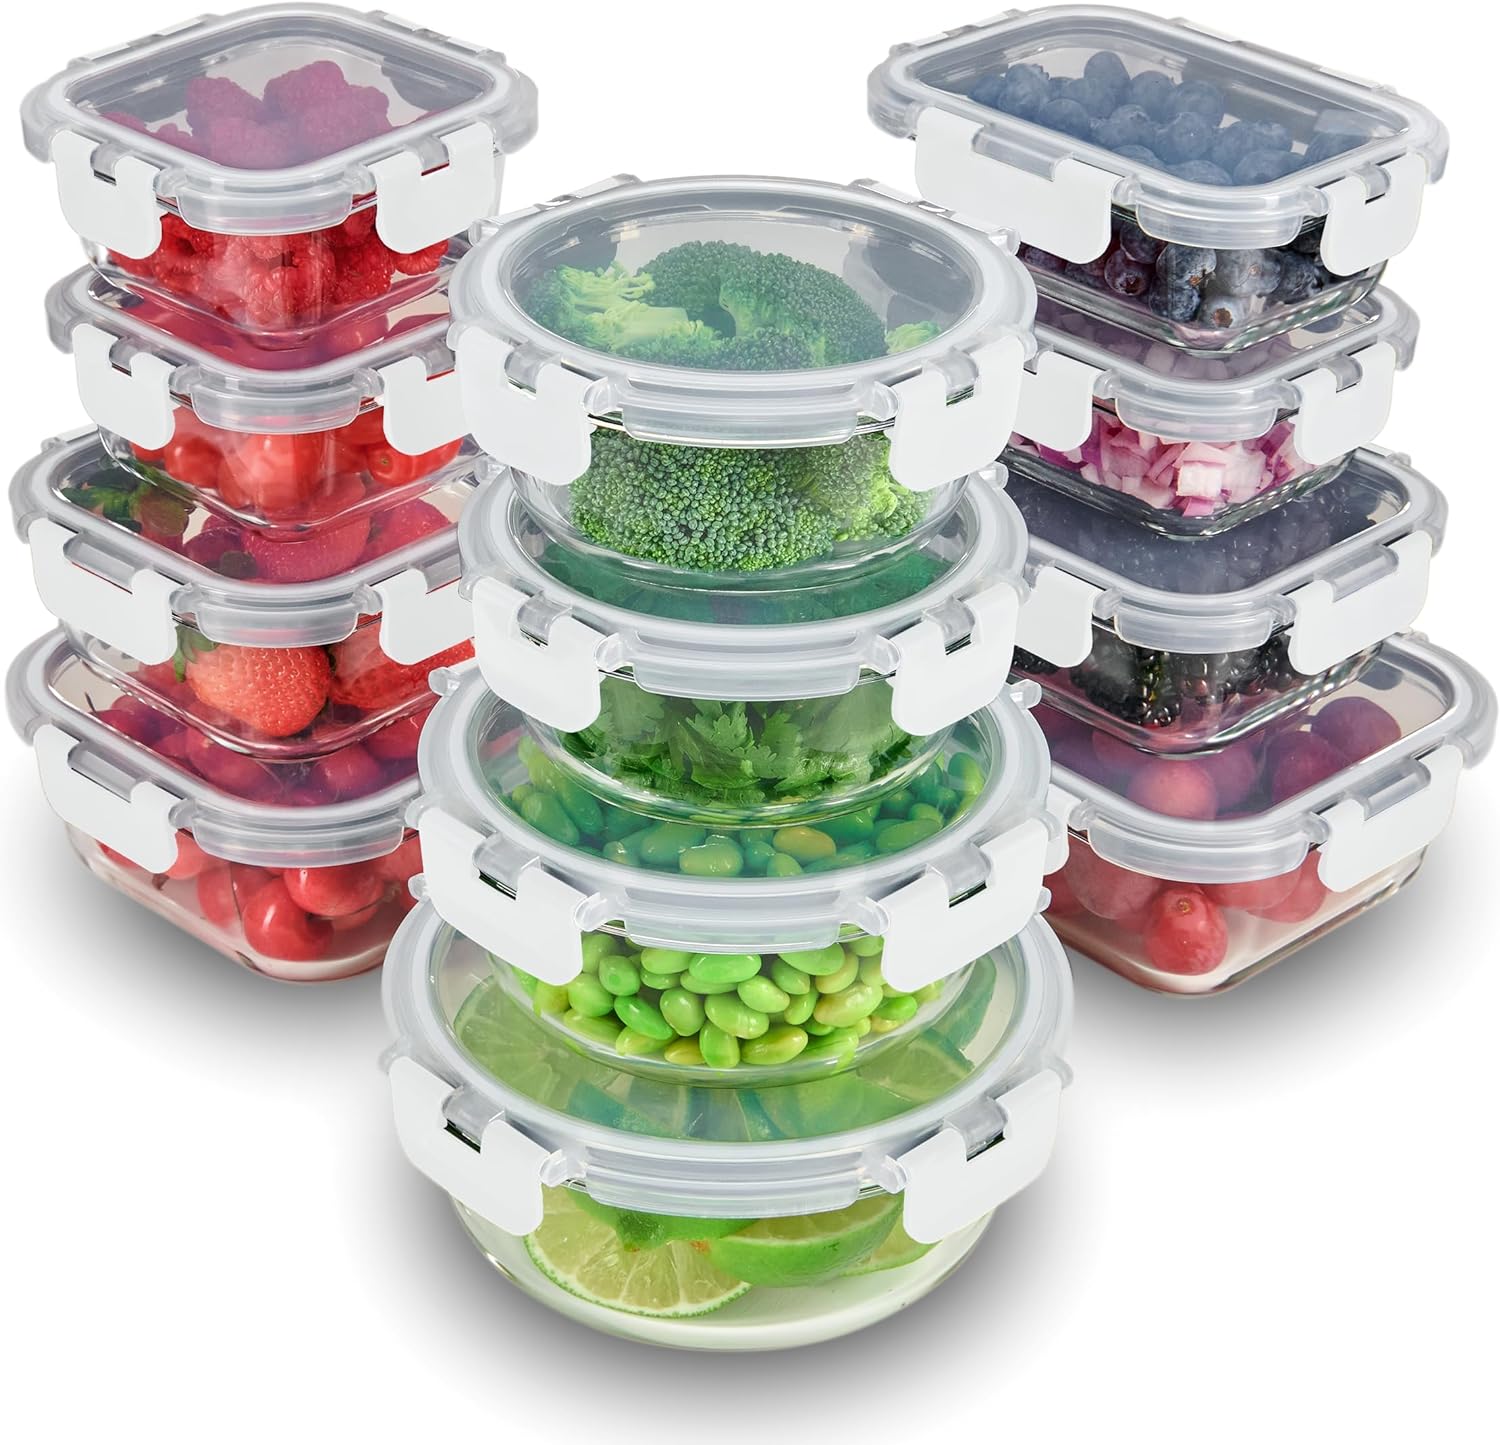 FineDine 24 Piece Glass Storage Containers with Lids - Leak Proof, Dishwasher Safe Glass Food Storage Containers for Meal Prep or Leftovers, White